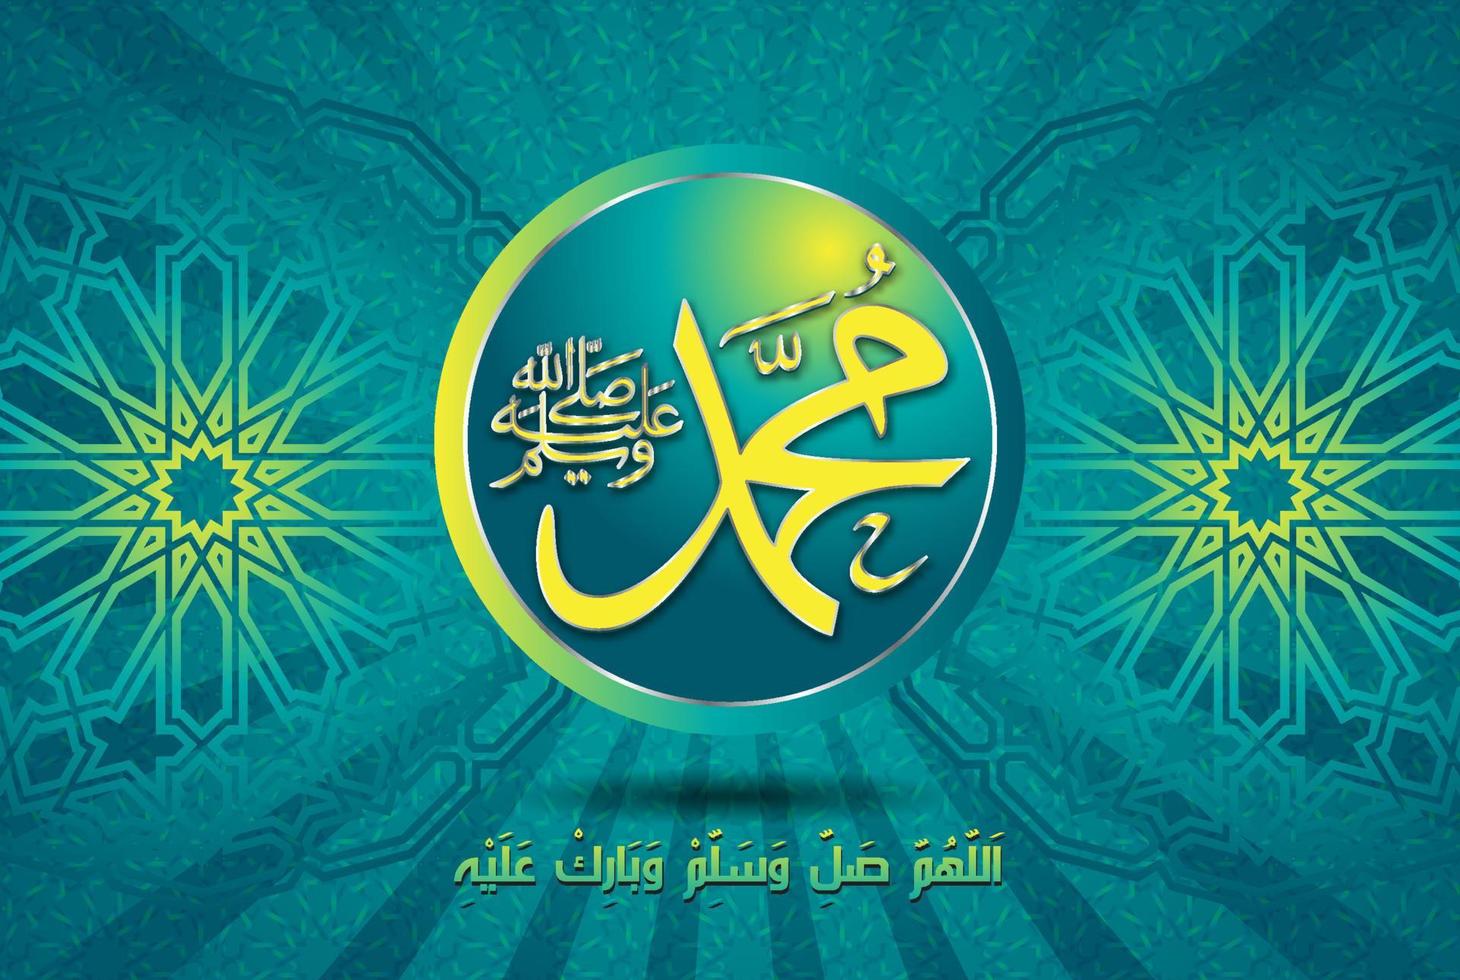 Al-Mawlid Al-Nabawi Al-sharif. Translated The honorable Birth of Prophet Mohammad. Arabic Calligraphy vector